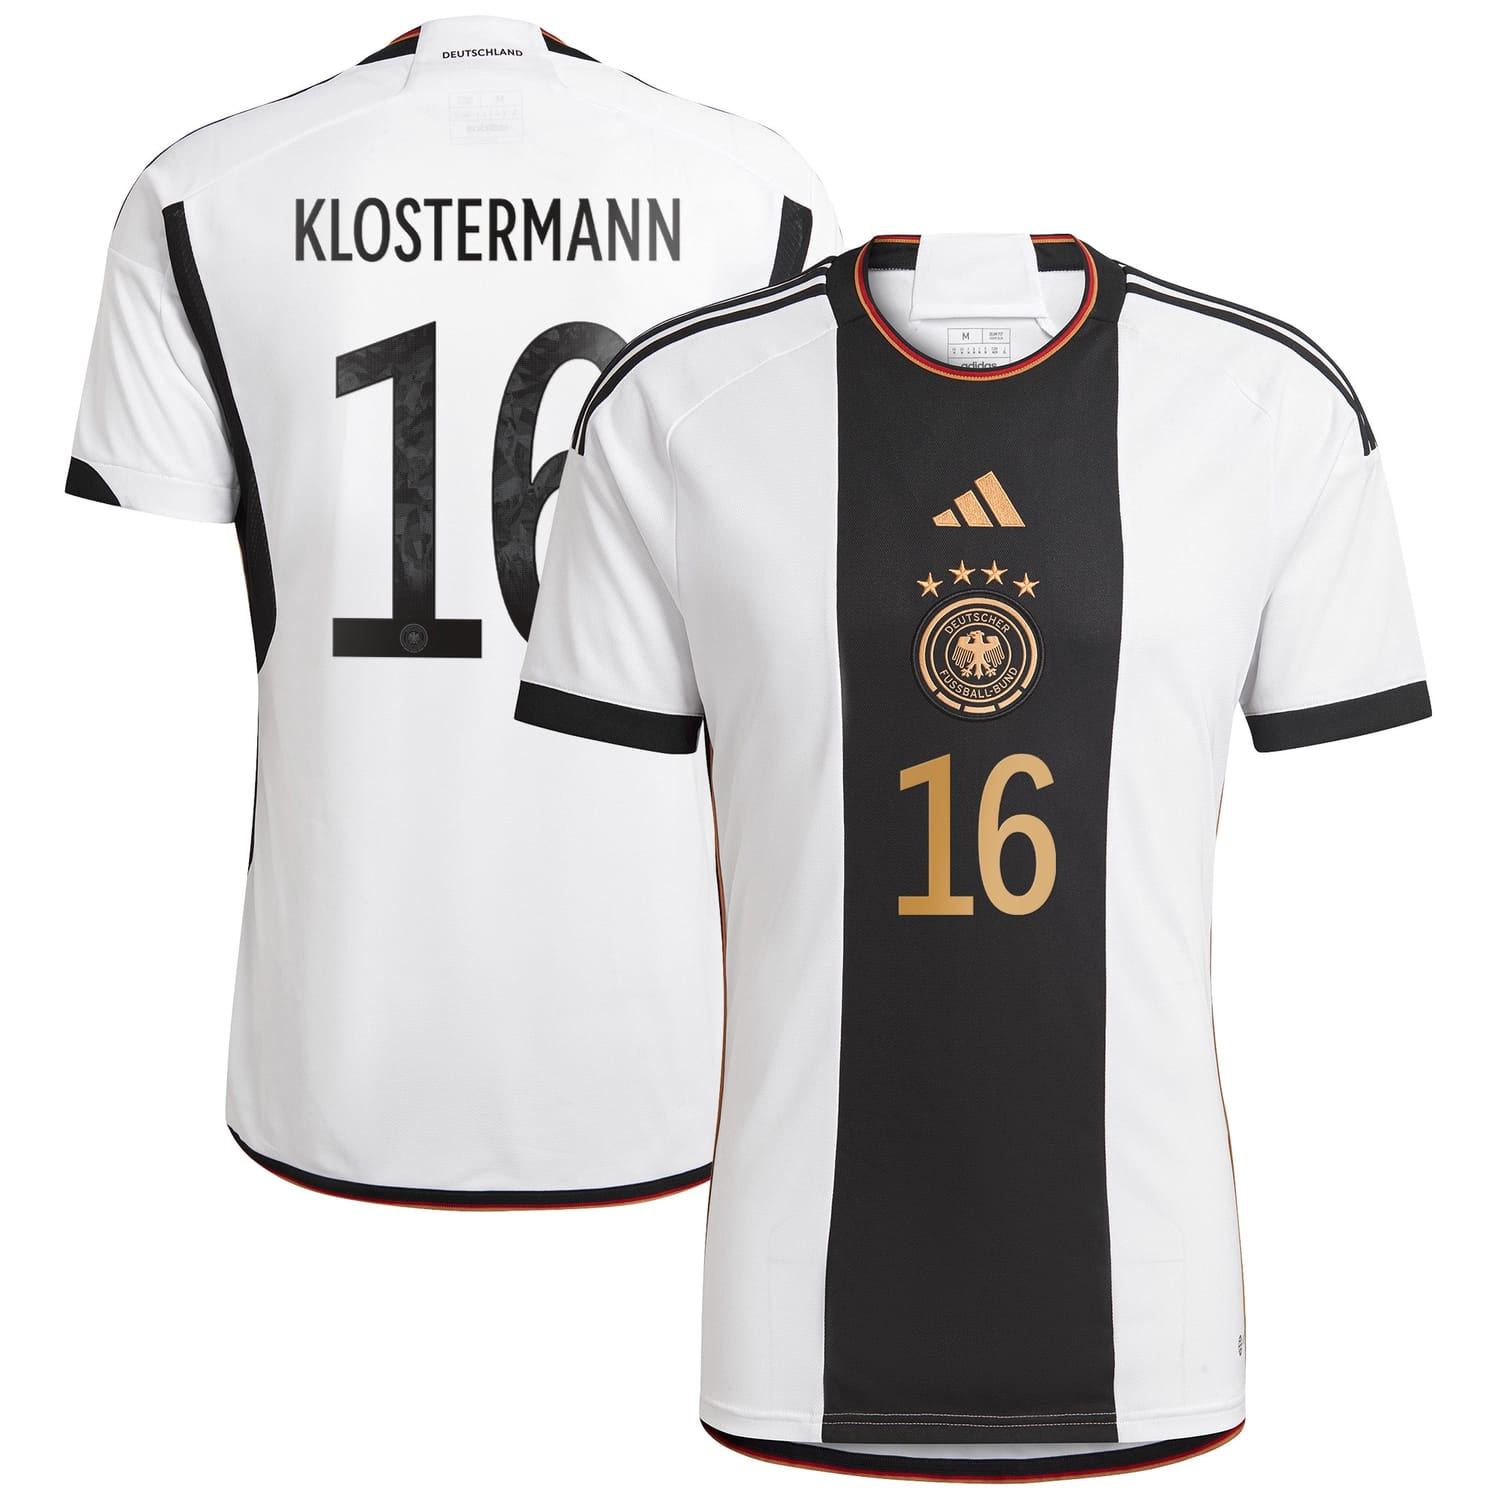 Germany National Team Home Jersey Shirt player Lukas Klostermann 16 printing for Men